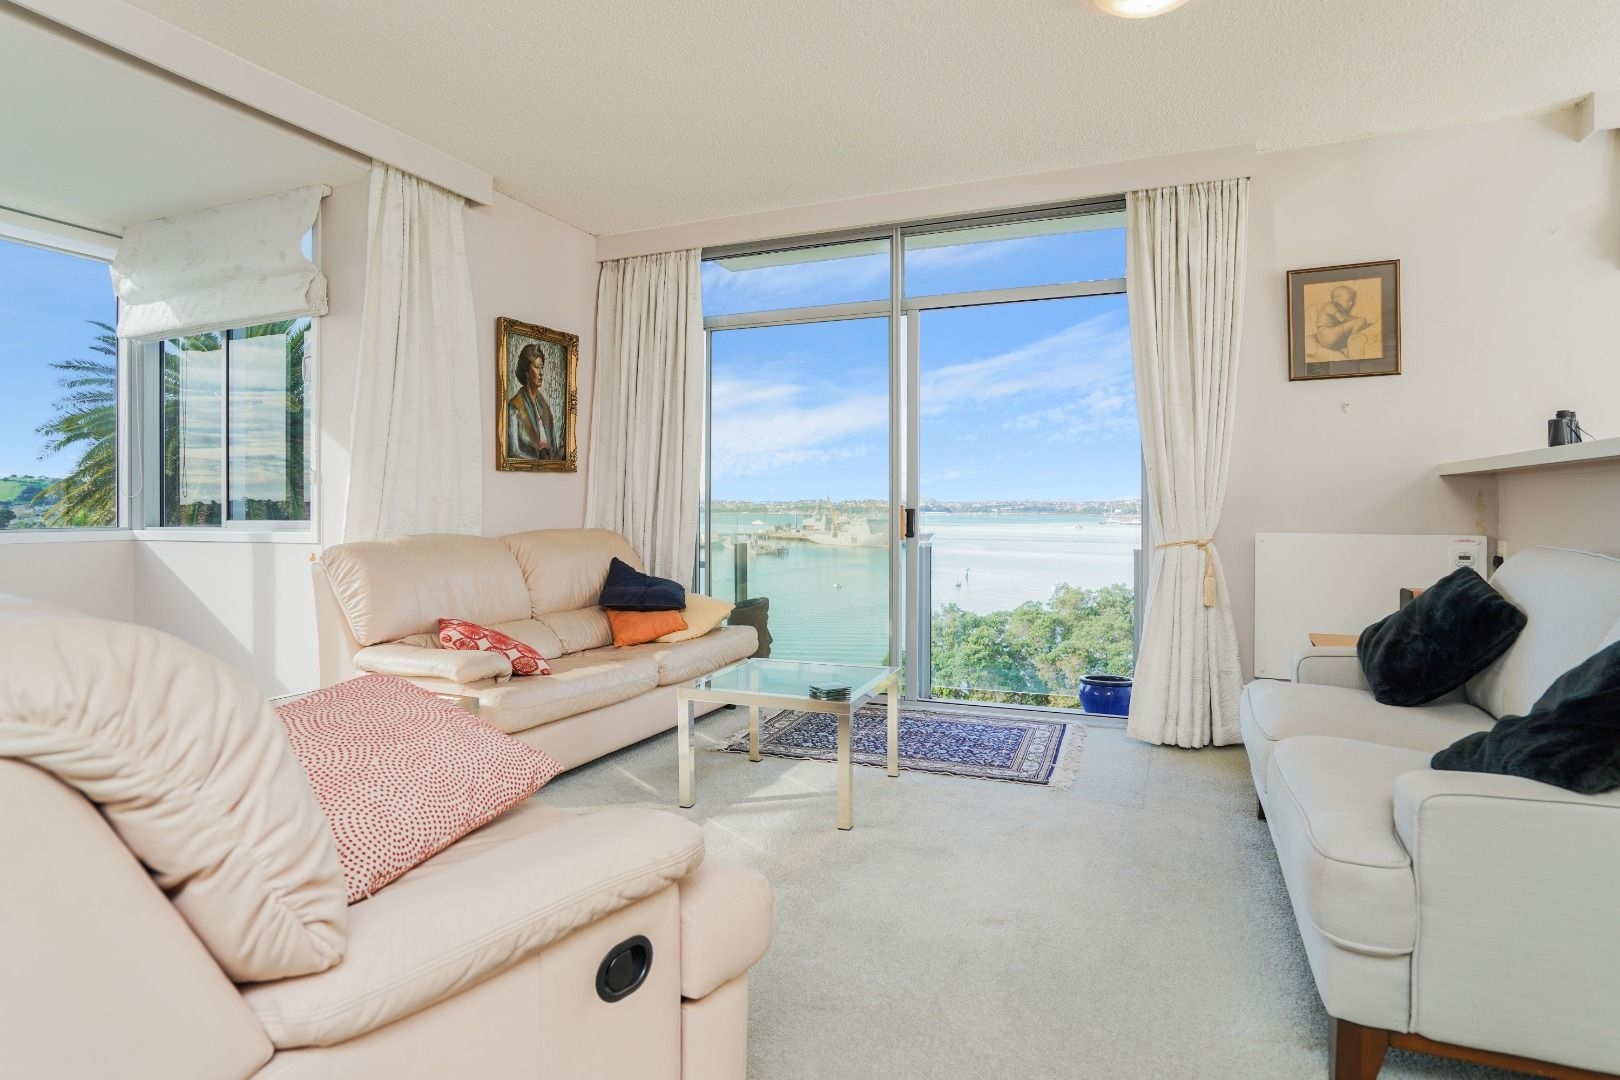 180 degree views in this unique Stanley Bay apartment image 1